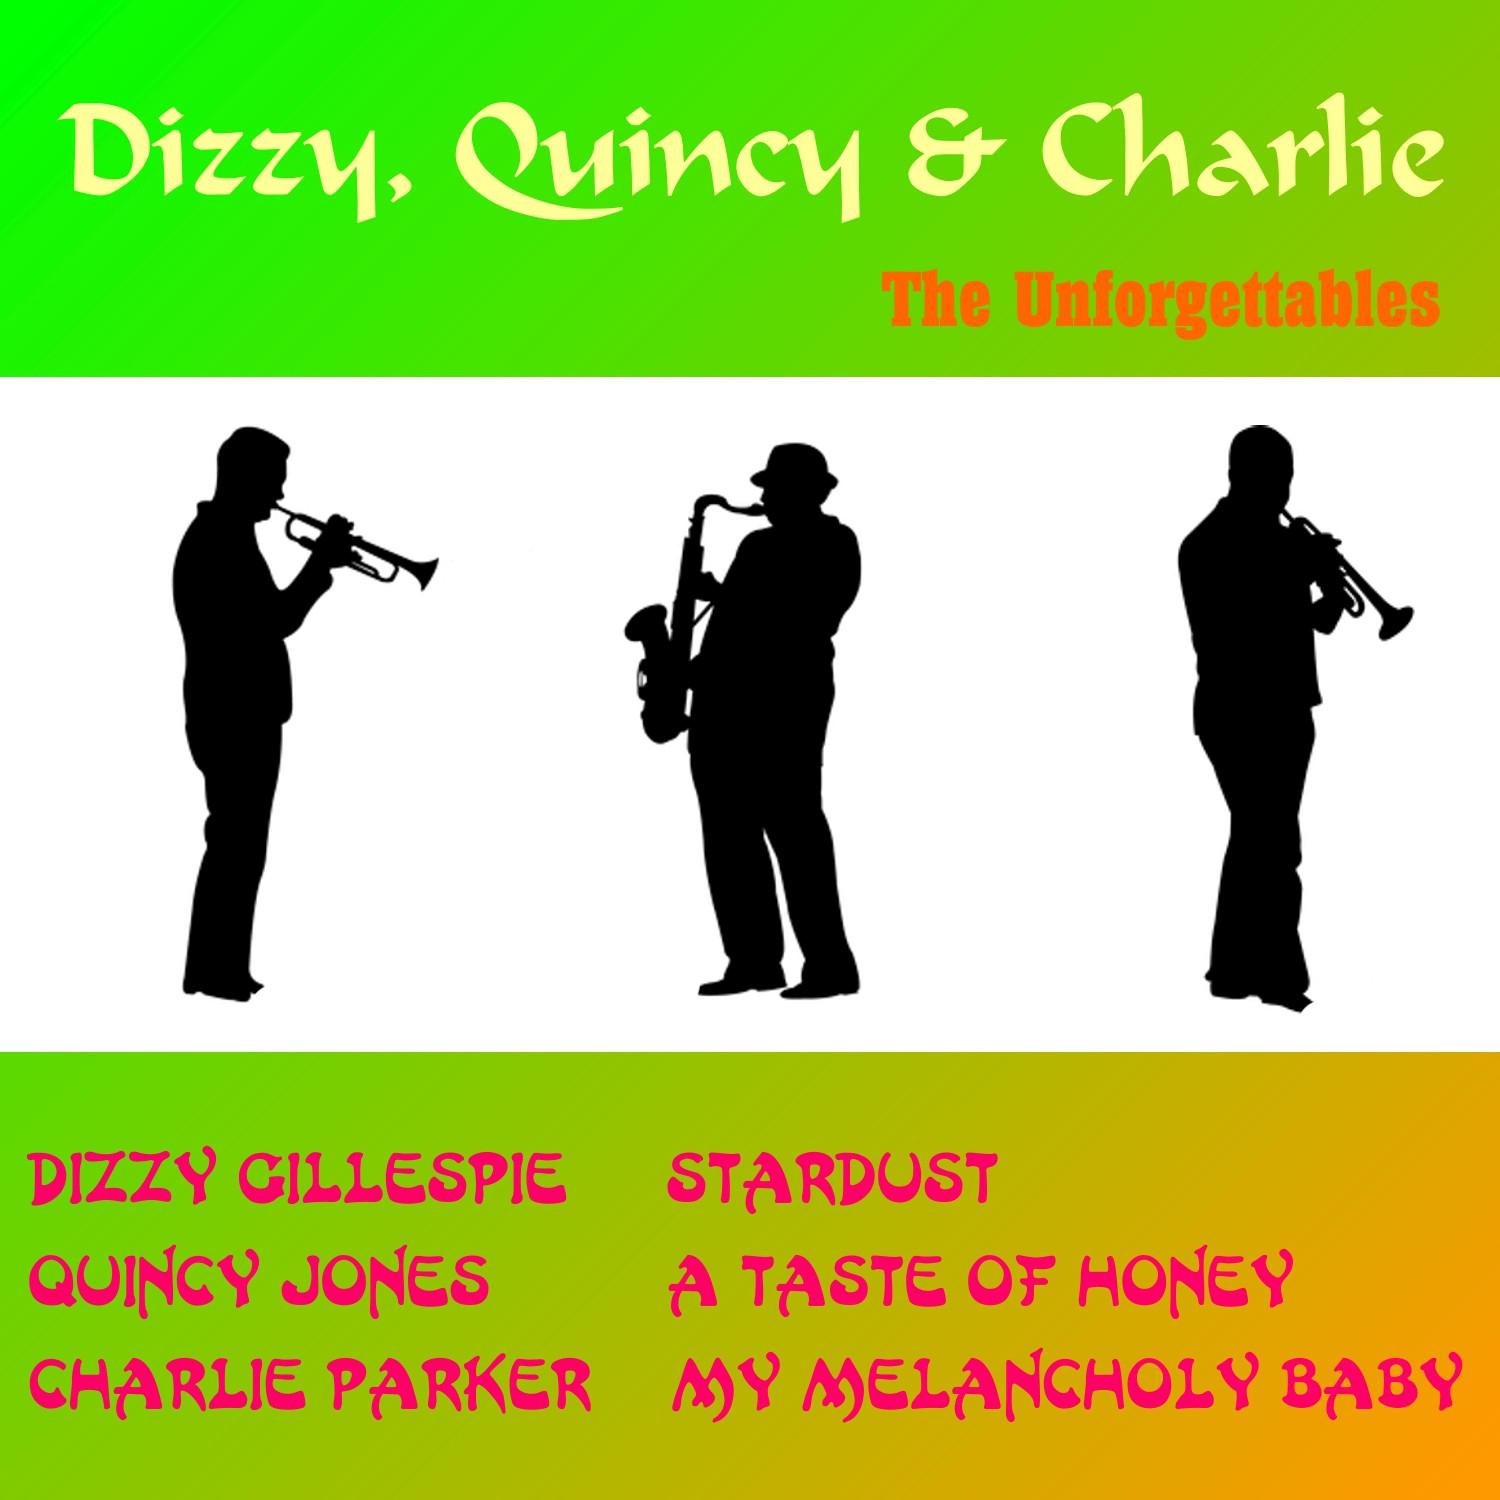 Dizzy, Quincy & Charlie - The Unforgettables